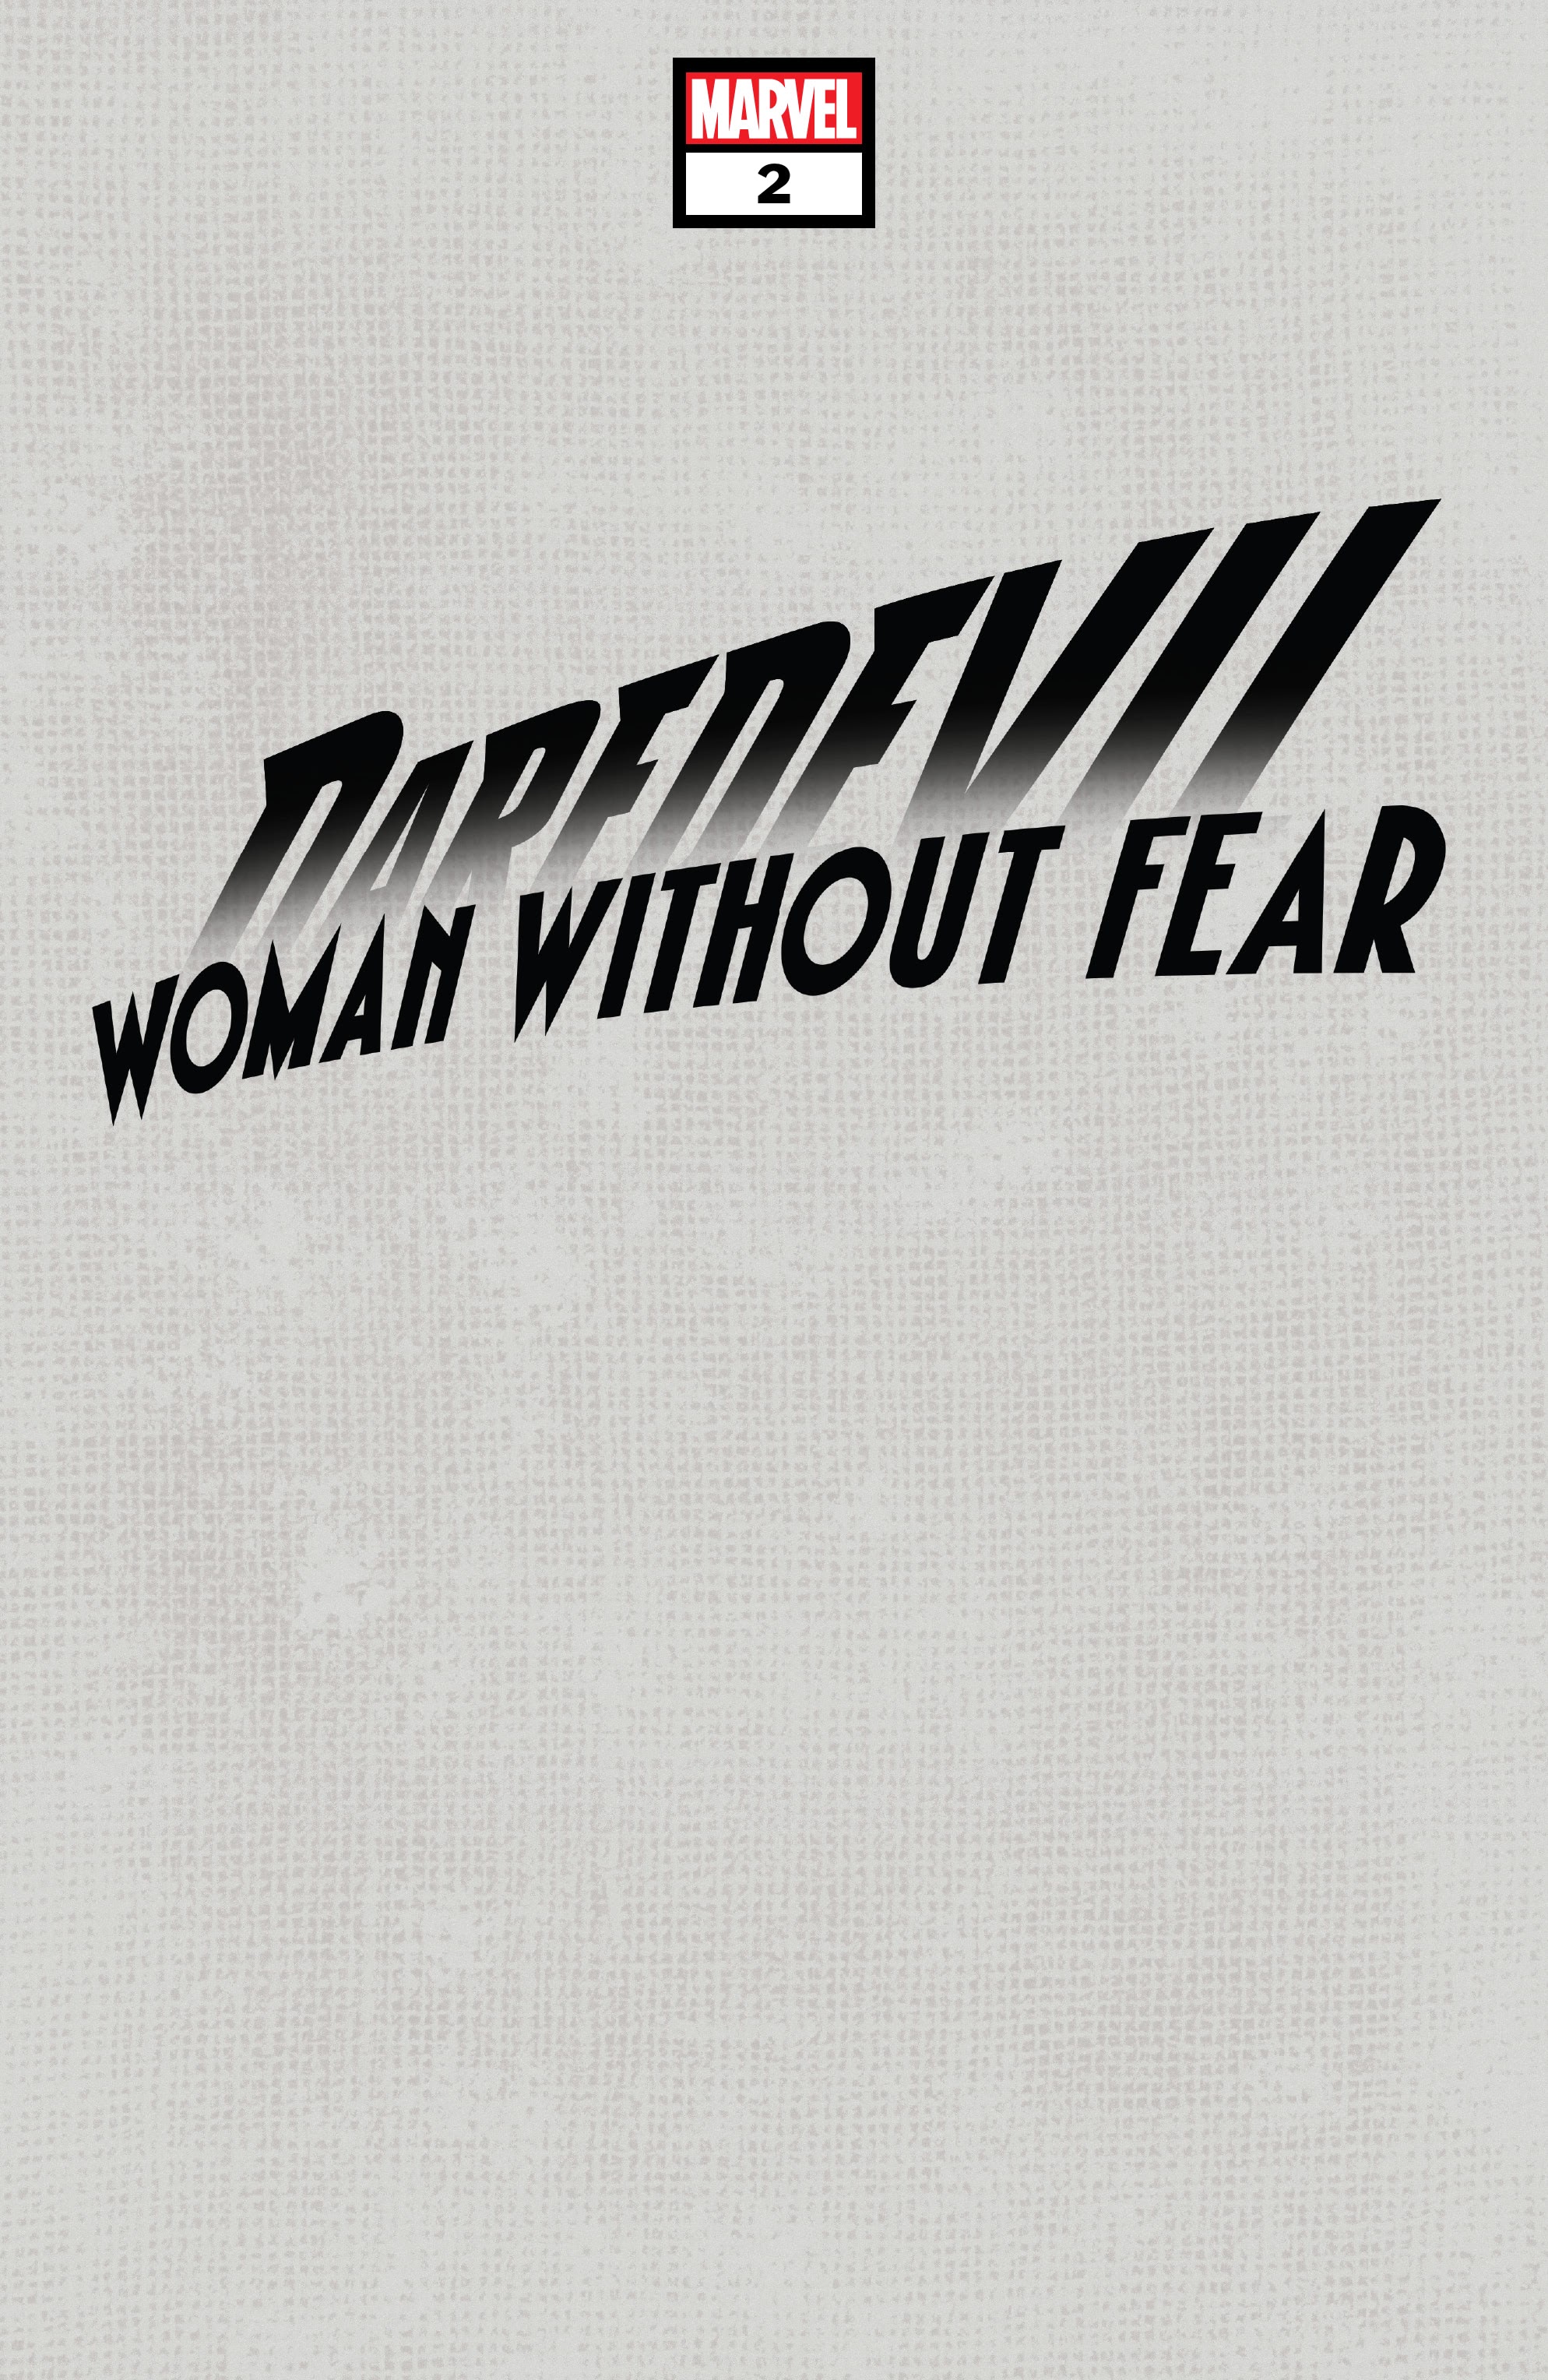 Read online Daredevil: Woman Without Fear comic -  Issue #2 - 24